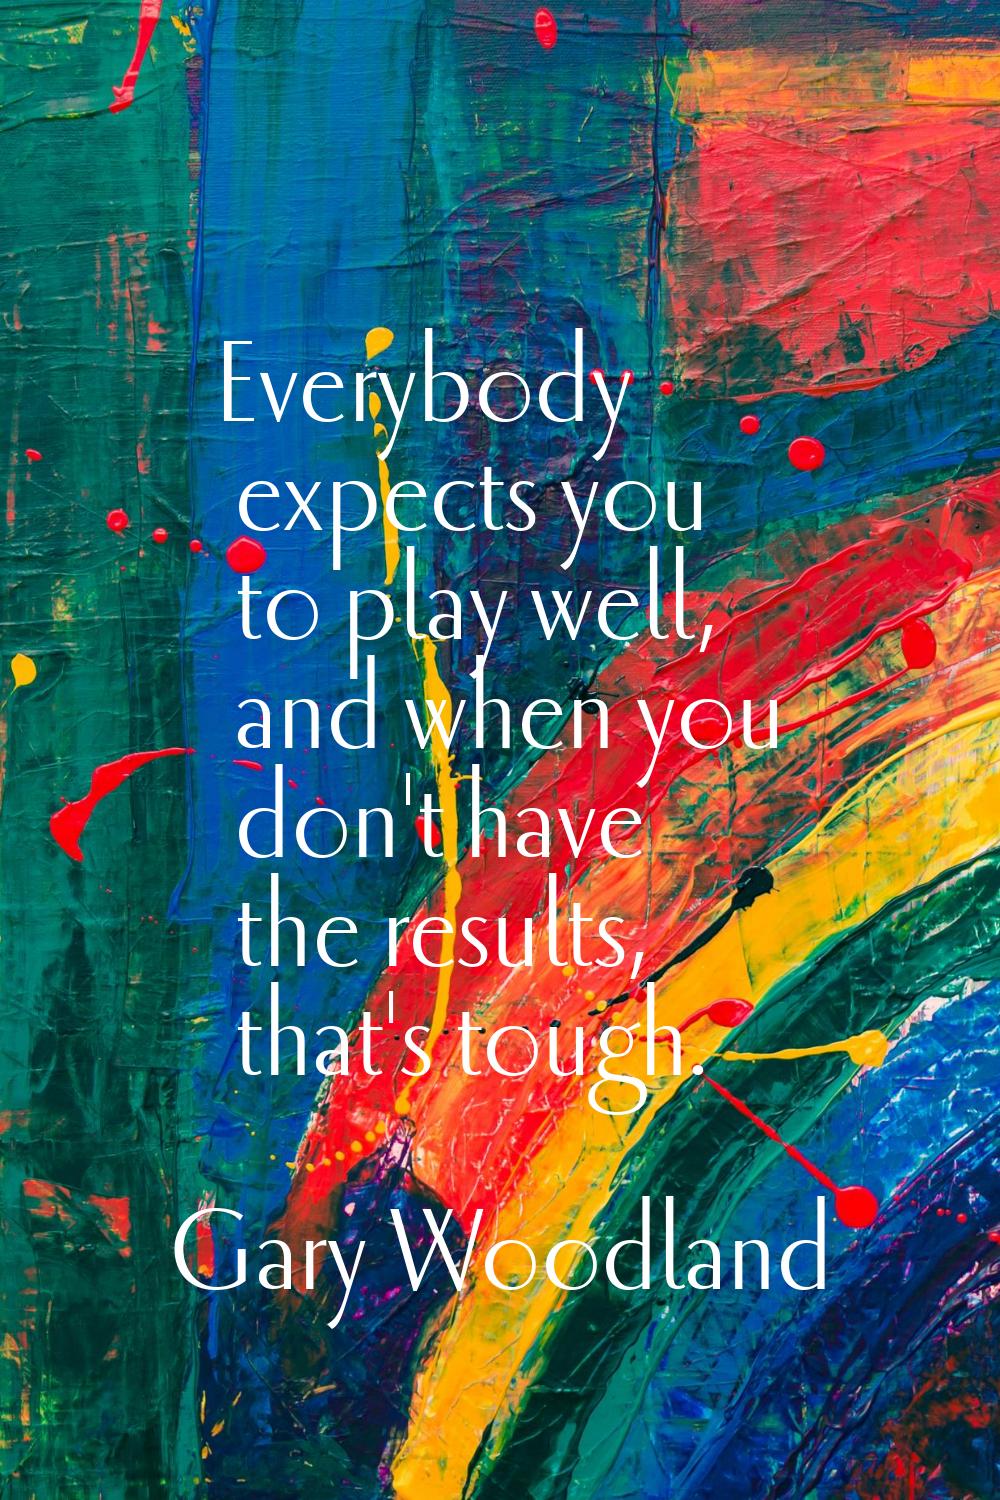 Everybody expects you to play well, and when you don't have the results, that's tough.